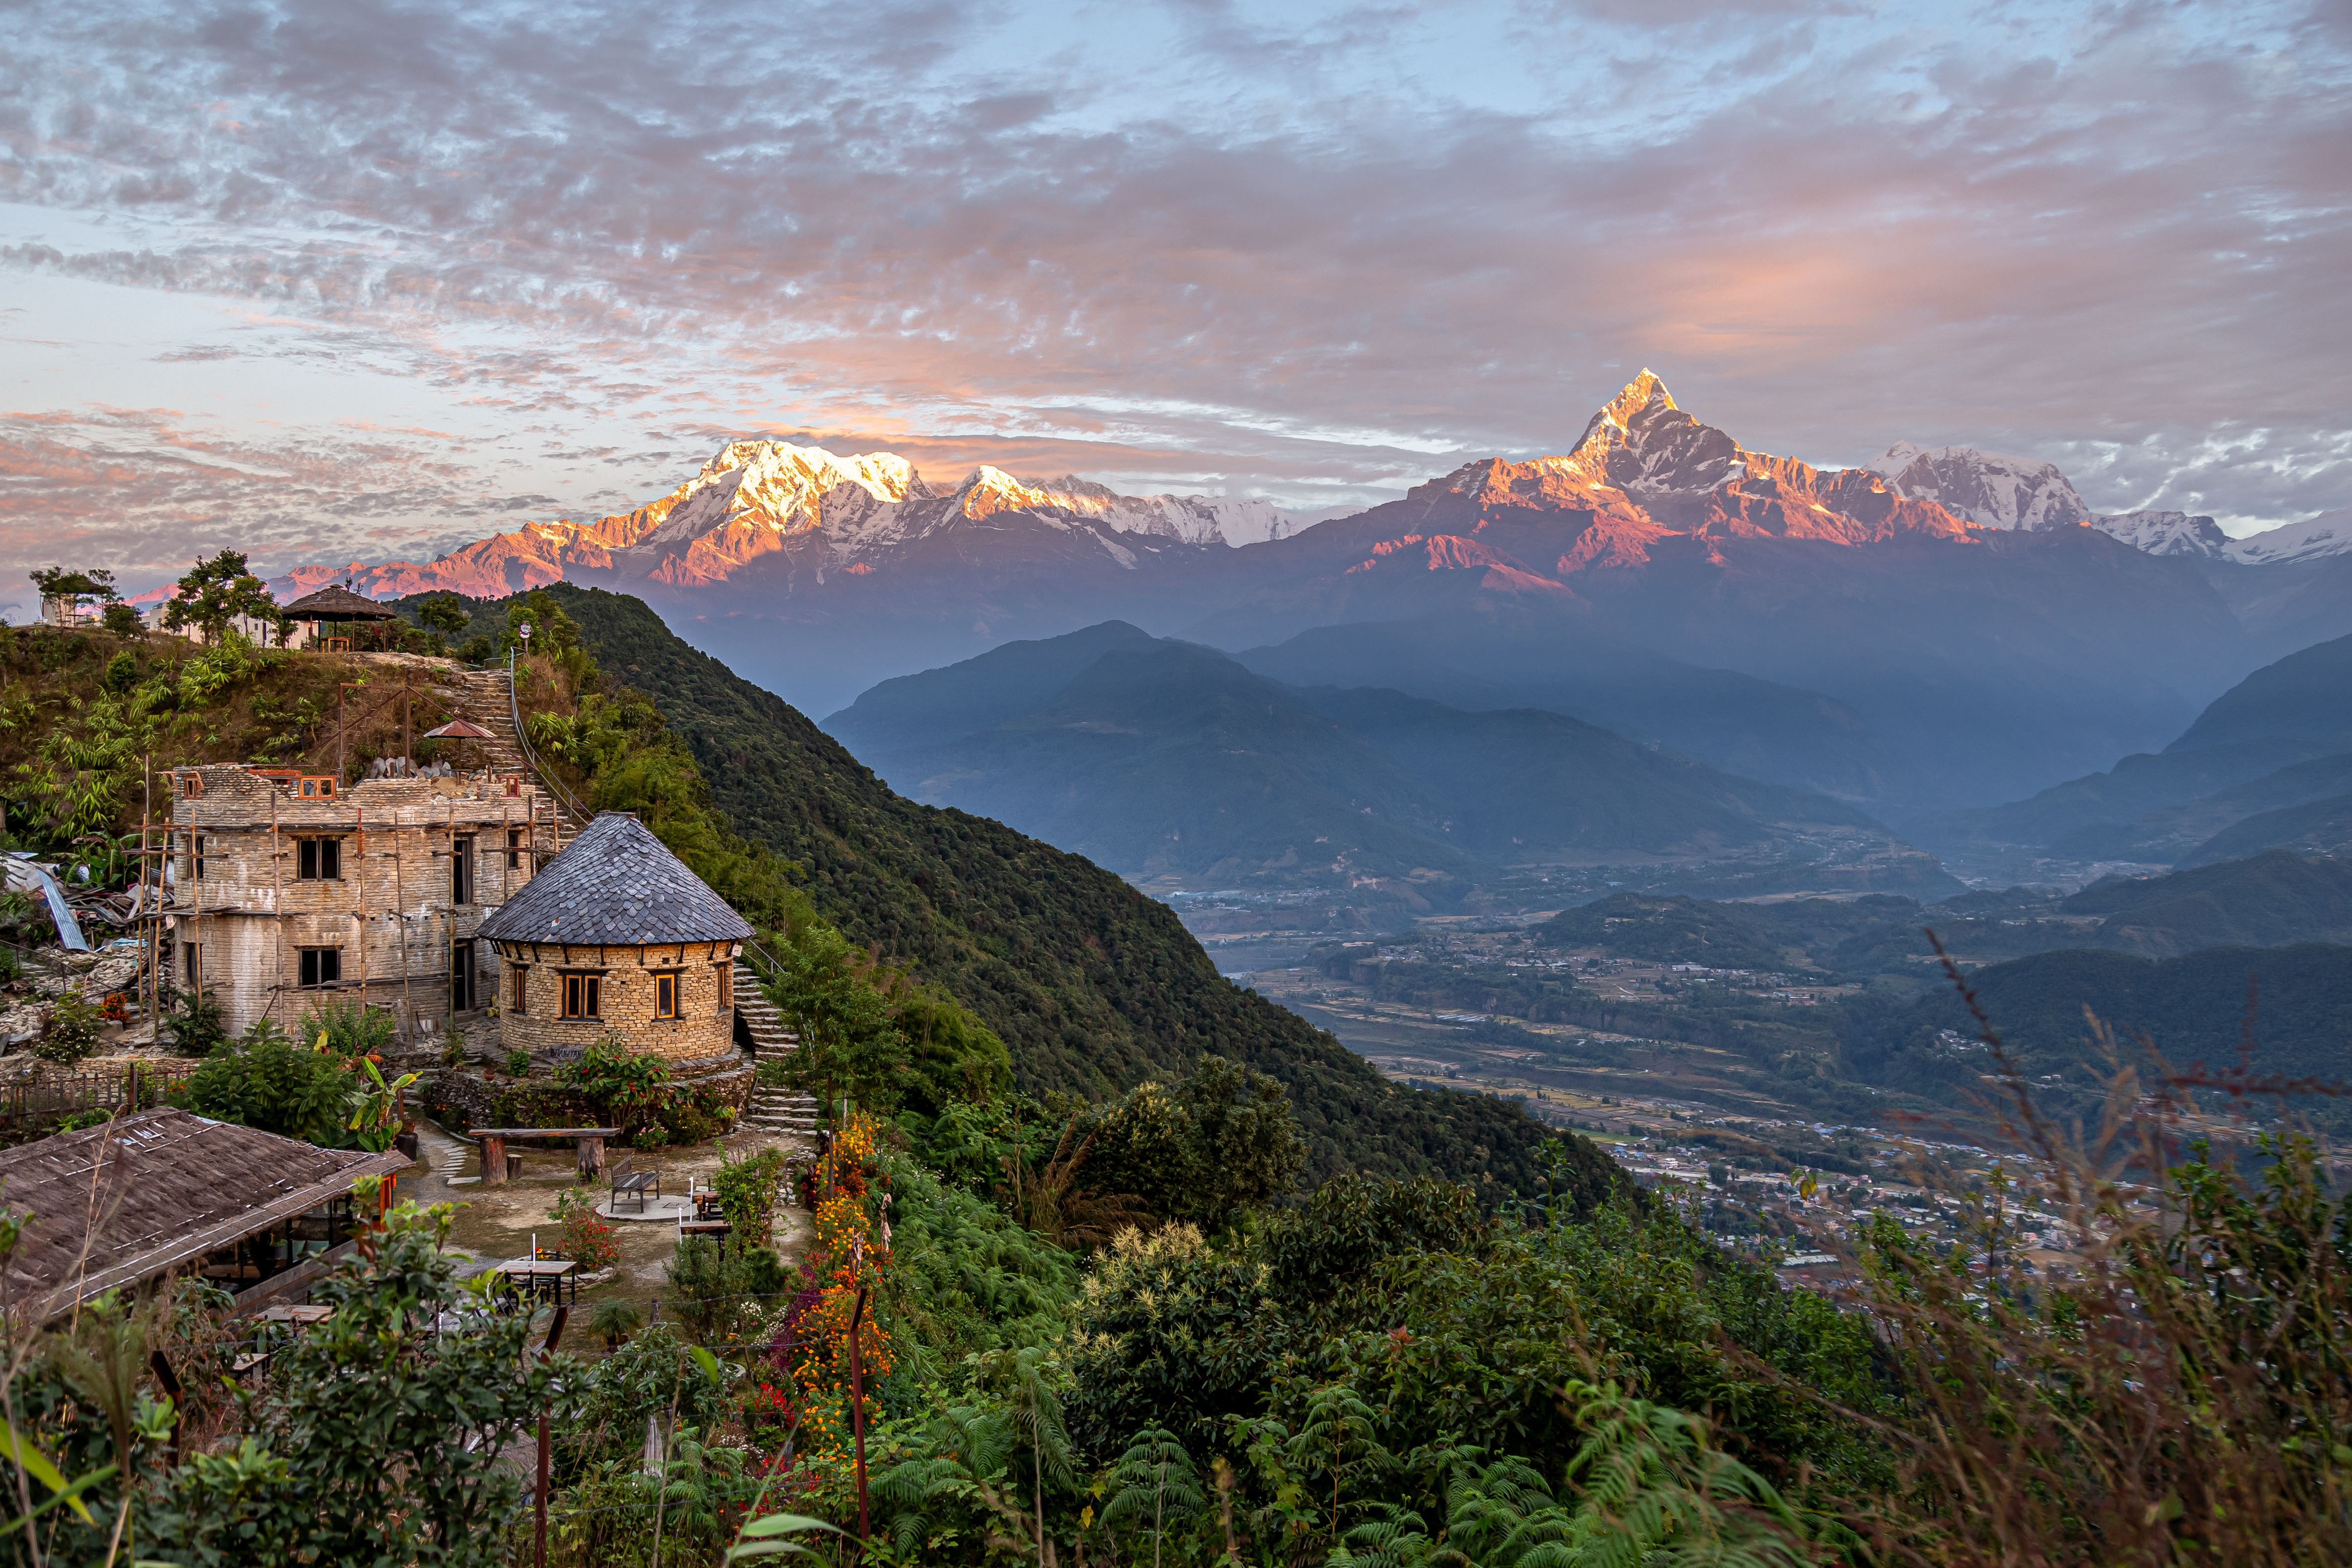 Hike the Himalayas in Nepal